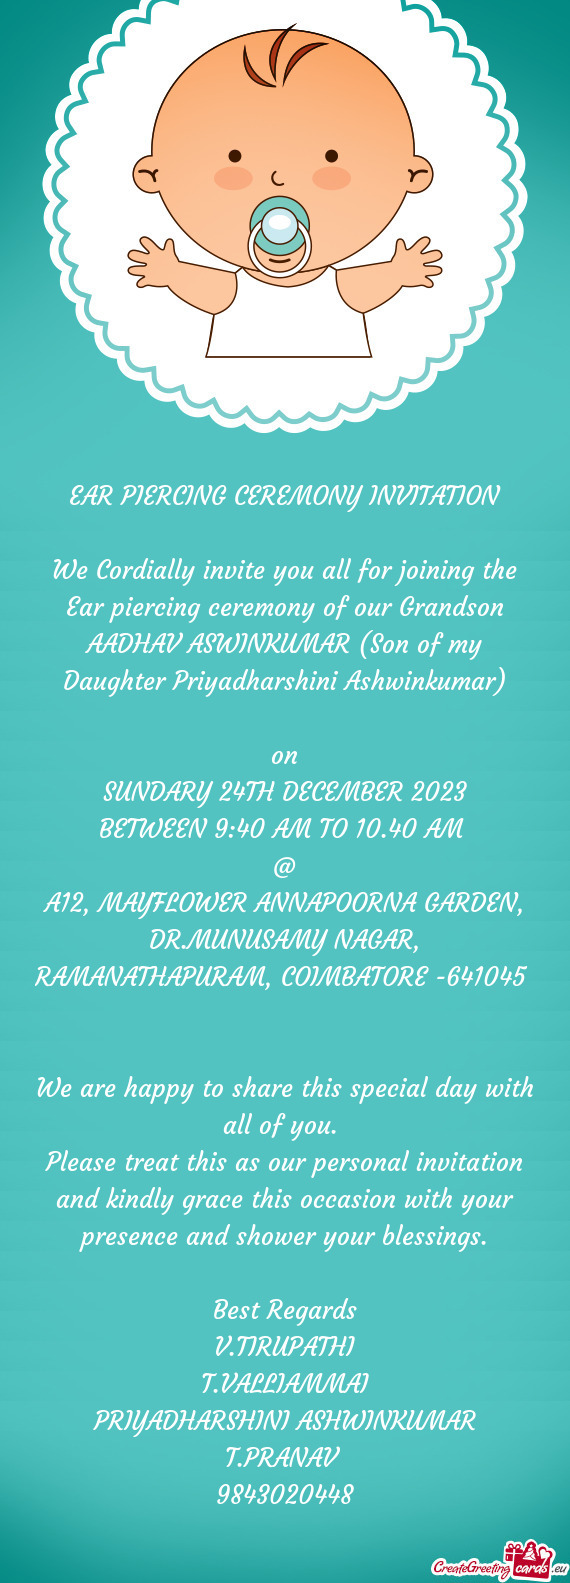 We Cordially invite you all for joining the Ear piercing ceremony of our Grandson AADHAV ASWINKUMAR